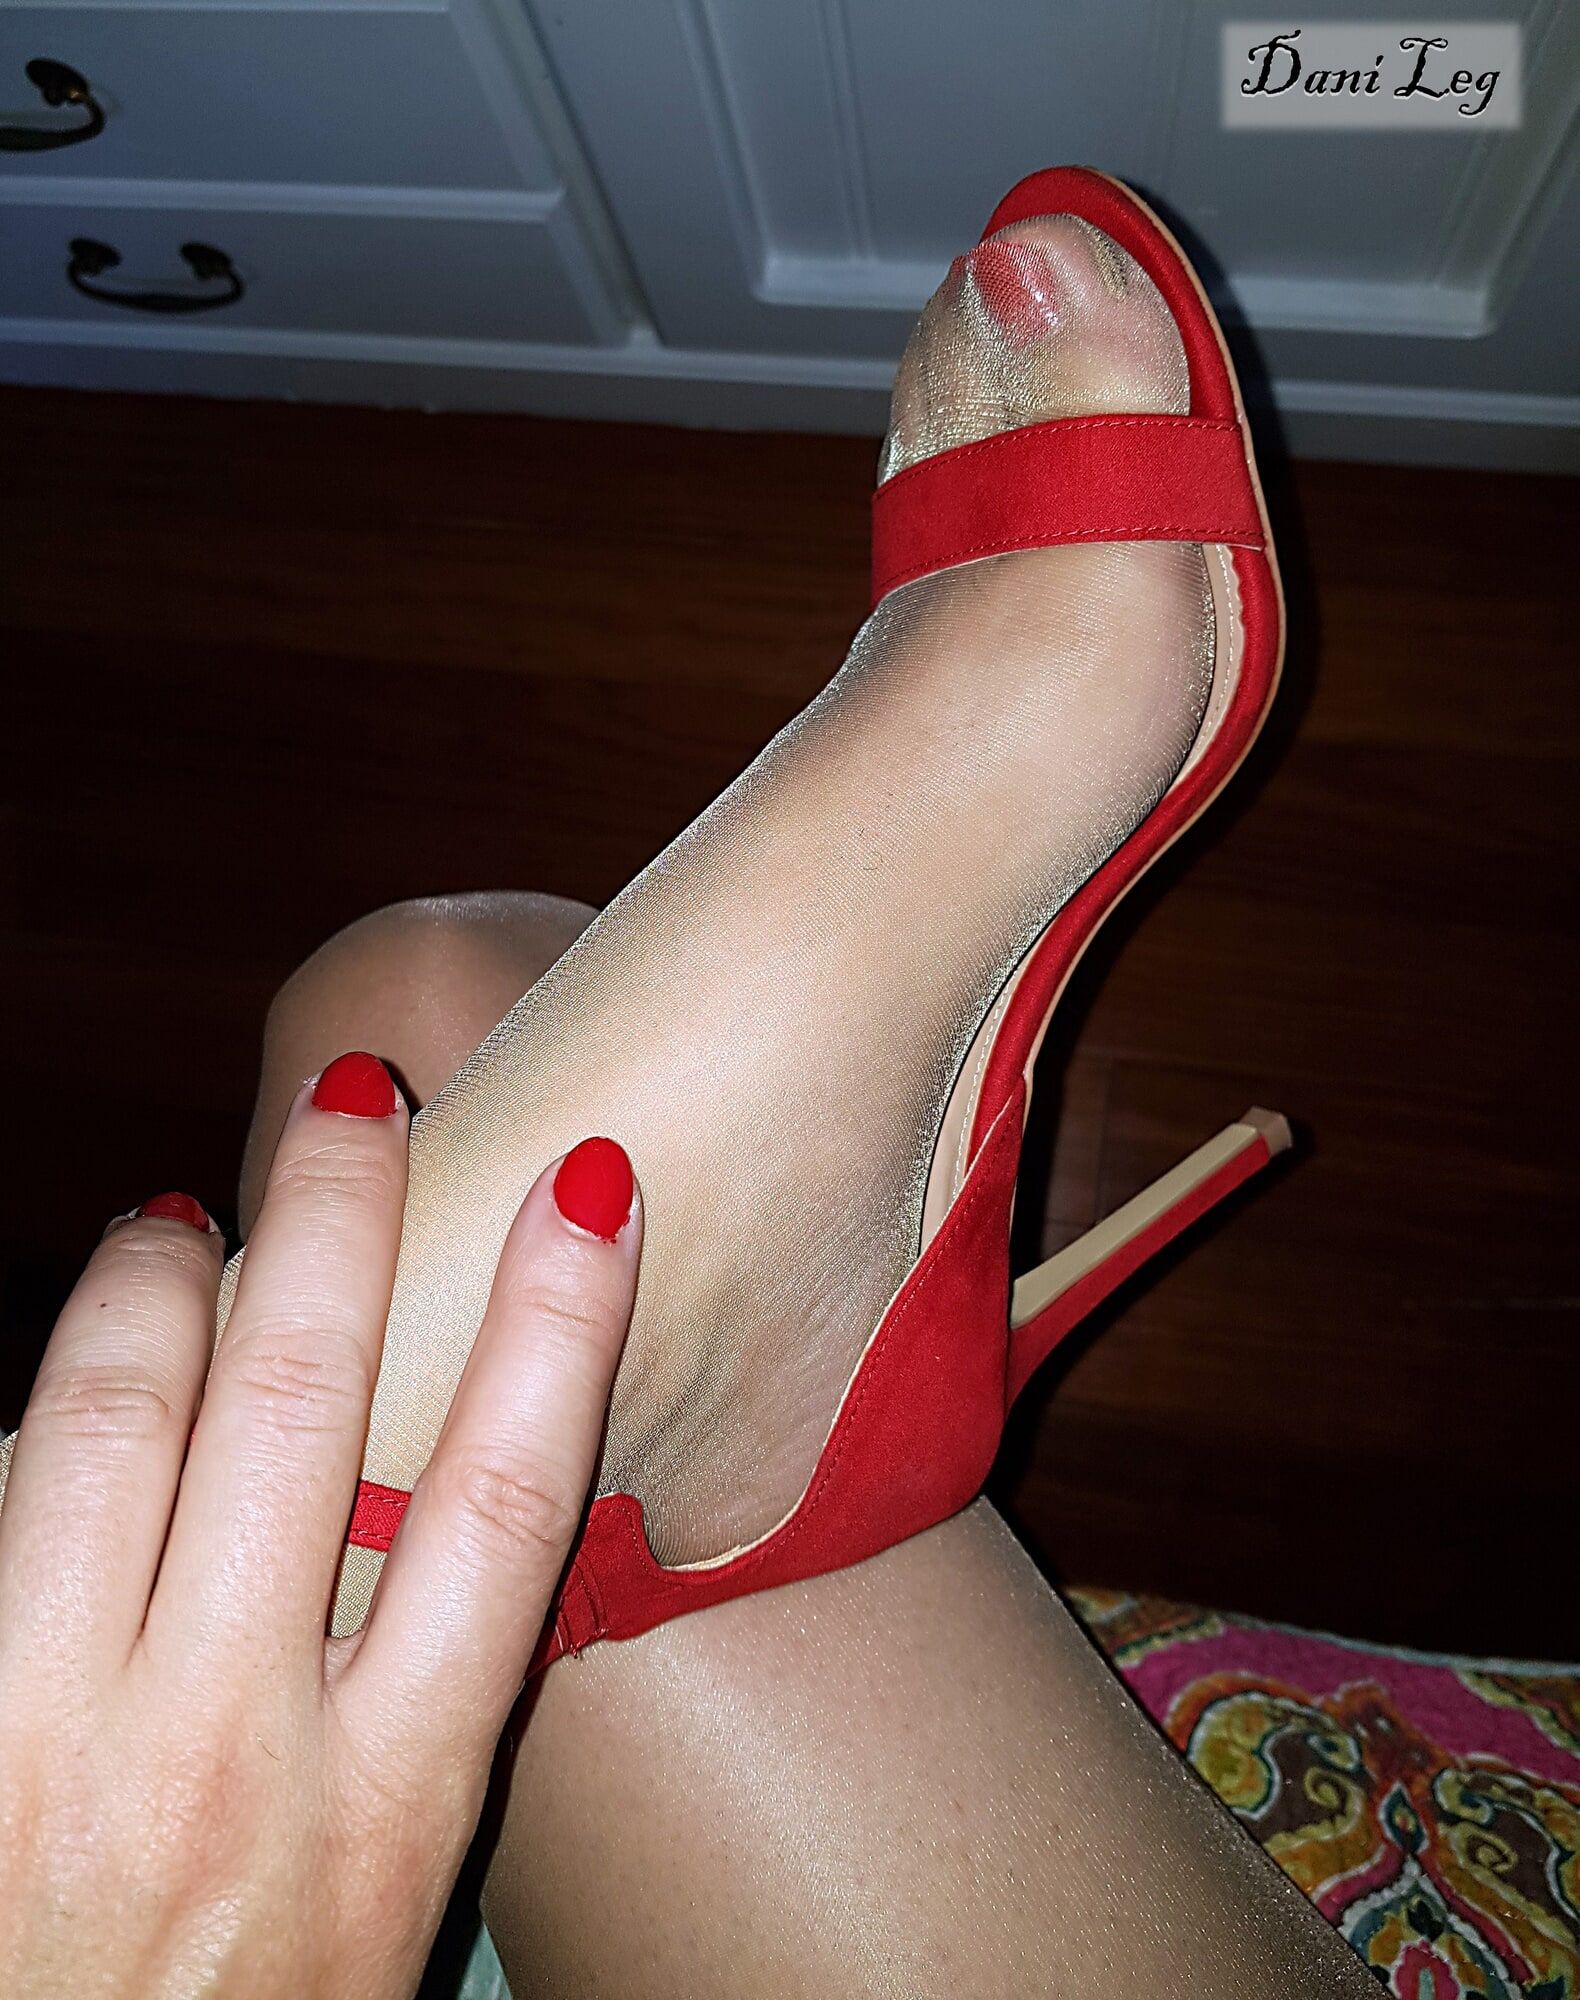 Curvy Legs, Nude Pantyhose and Hot Red Nails and Shoes #11